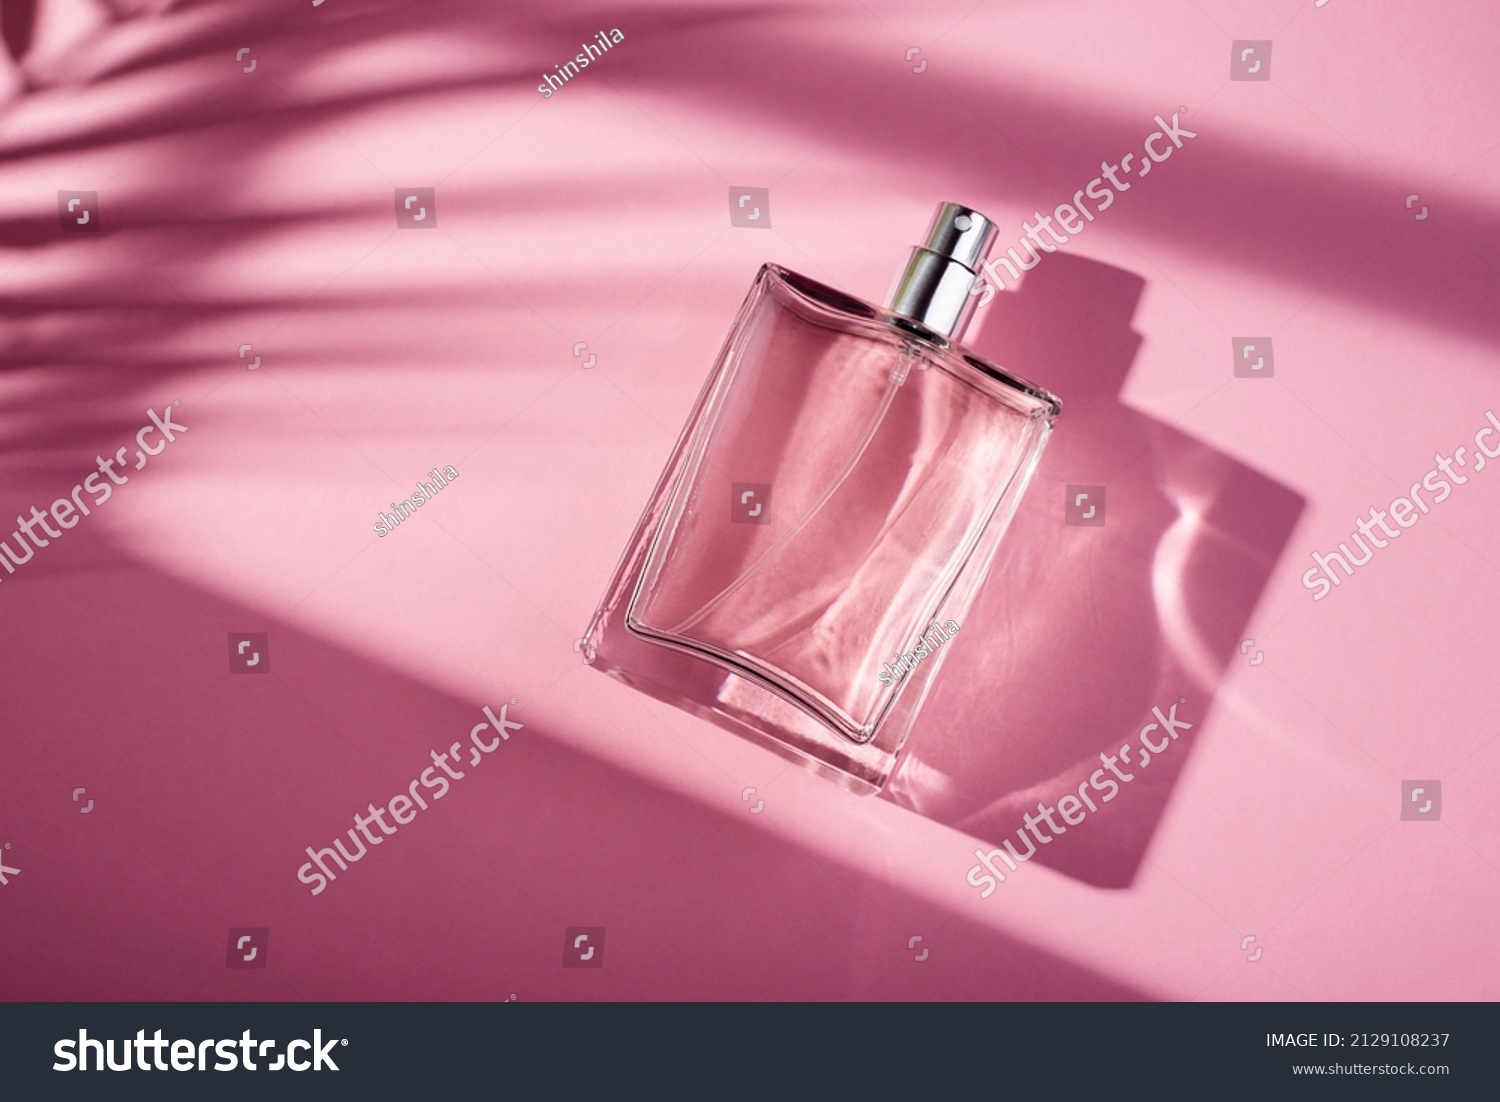 Transparent bottle of perfume on a pink background. Fragrance presentation with daylight. Trending concept in natural materials with window shadow. Women's essence. #2129108237